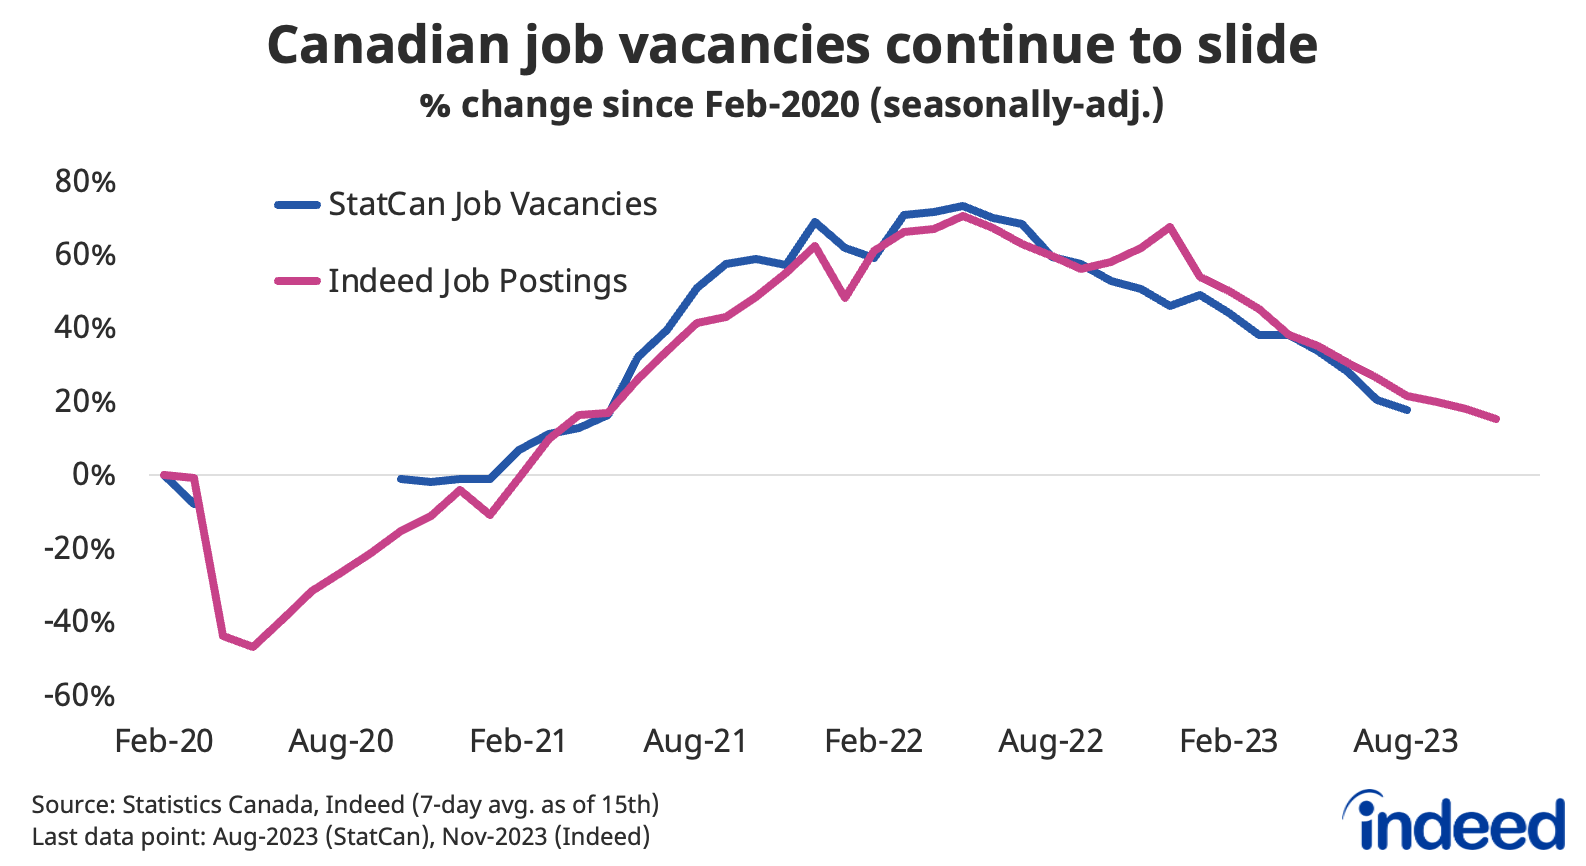 Line graph titled “Canadian job vacancies continue to slide,” shows the percent change in Canadian job vacancies, as well as the change in Canadian job postings on Indeed between February 2020 and August 2023, and November 2023, respectively. Both vacancies and postings have declined steadily since mid-2022, though they remain somewhat above pre-pandemic levels. 